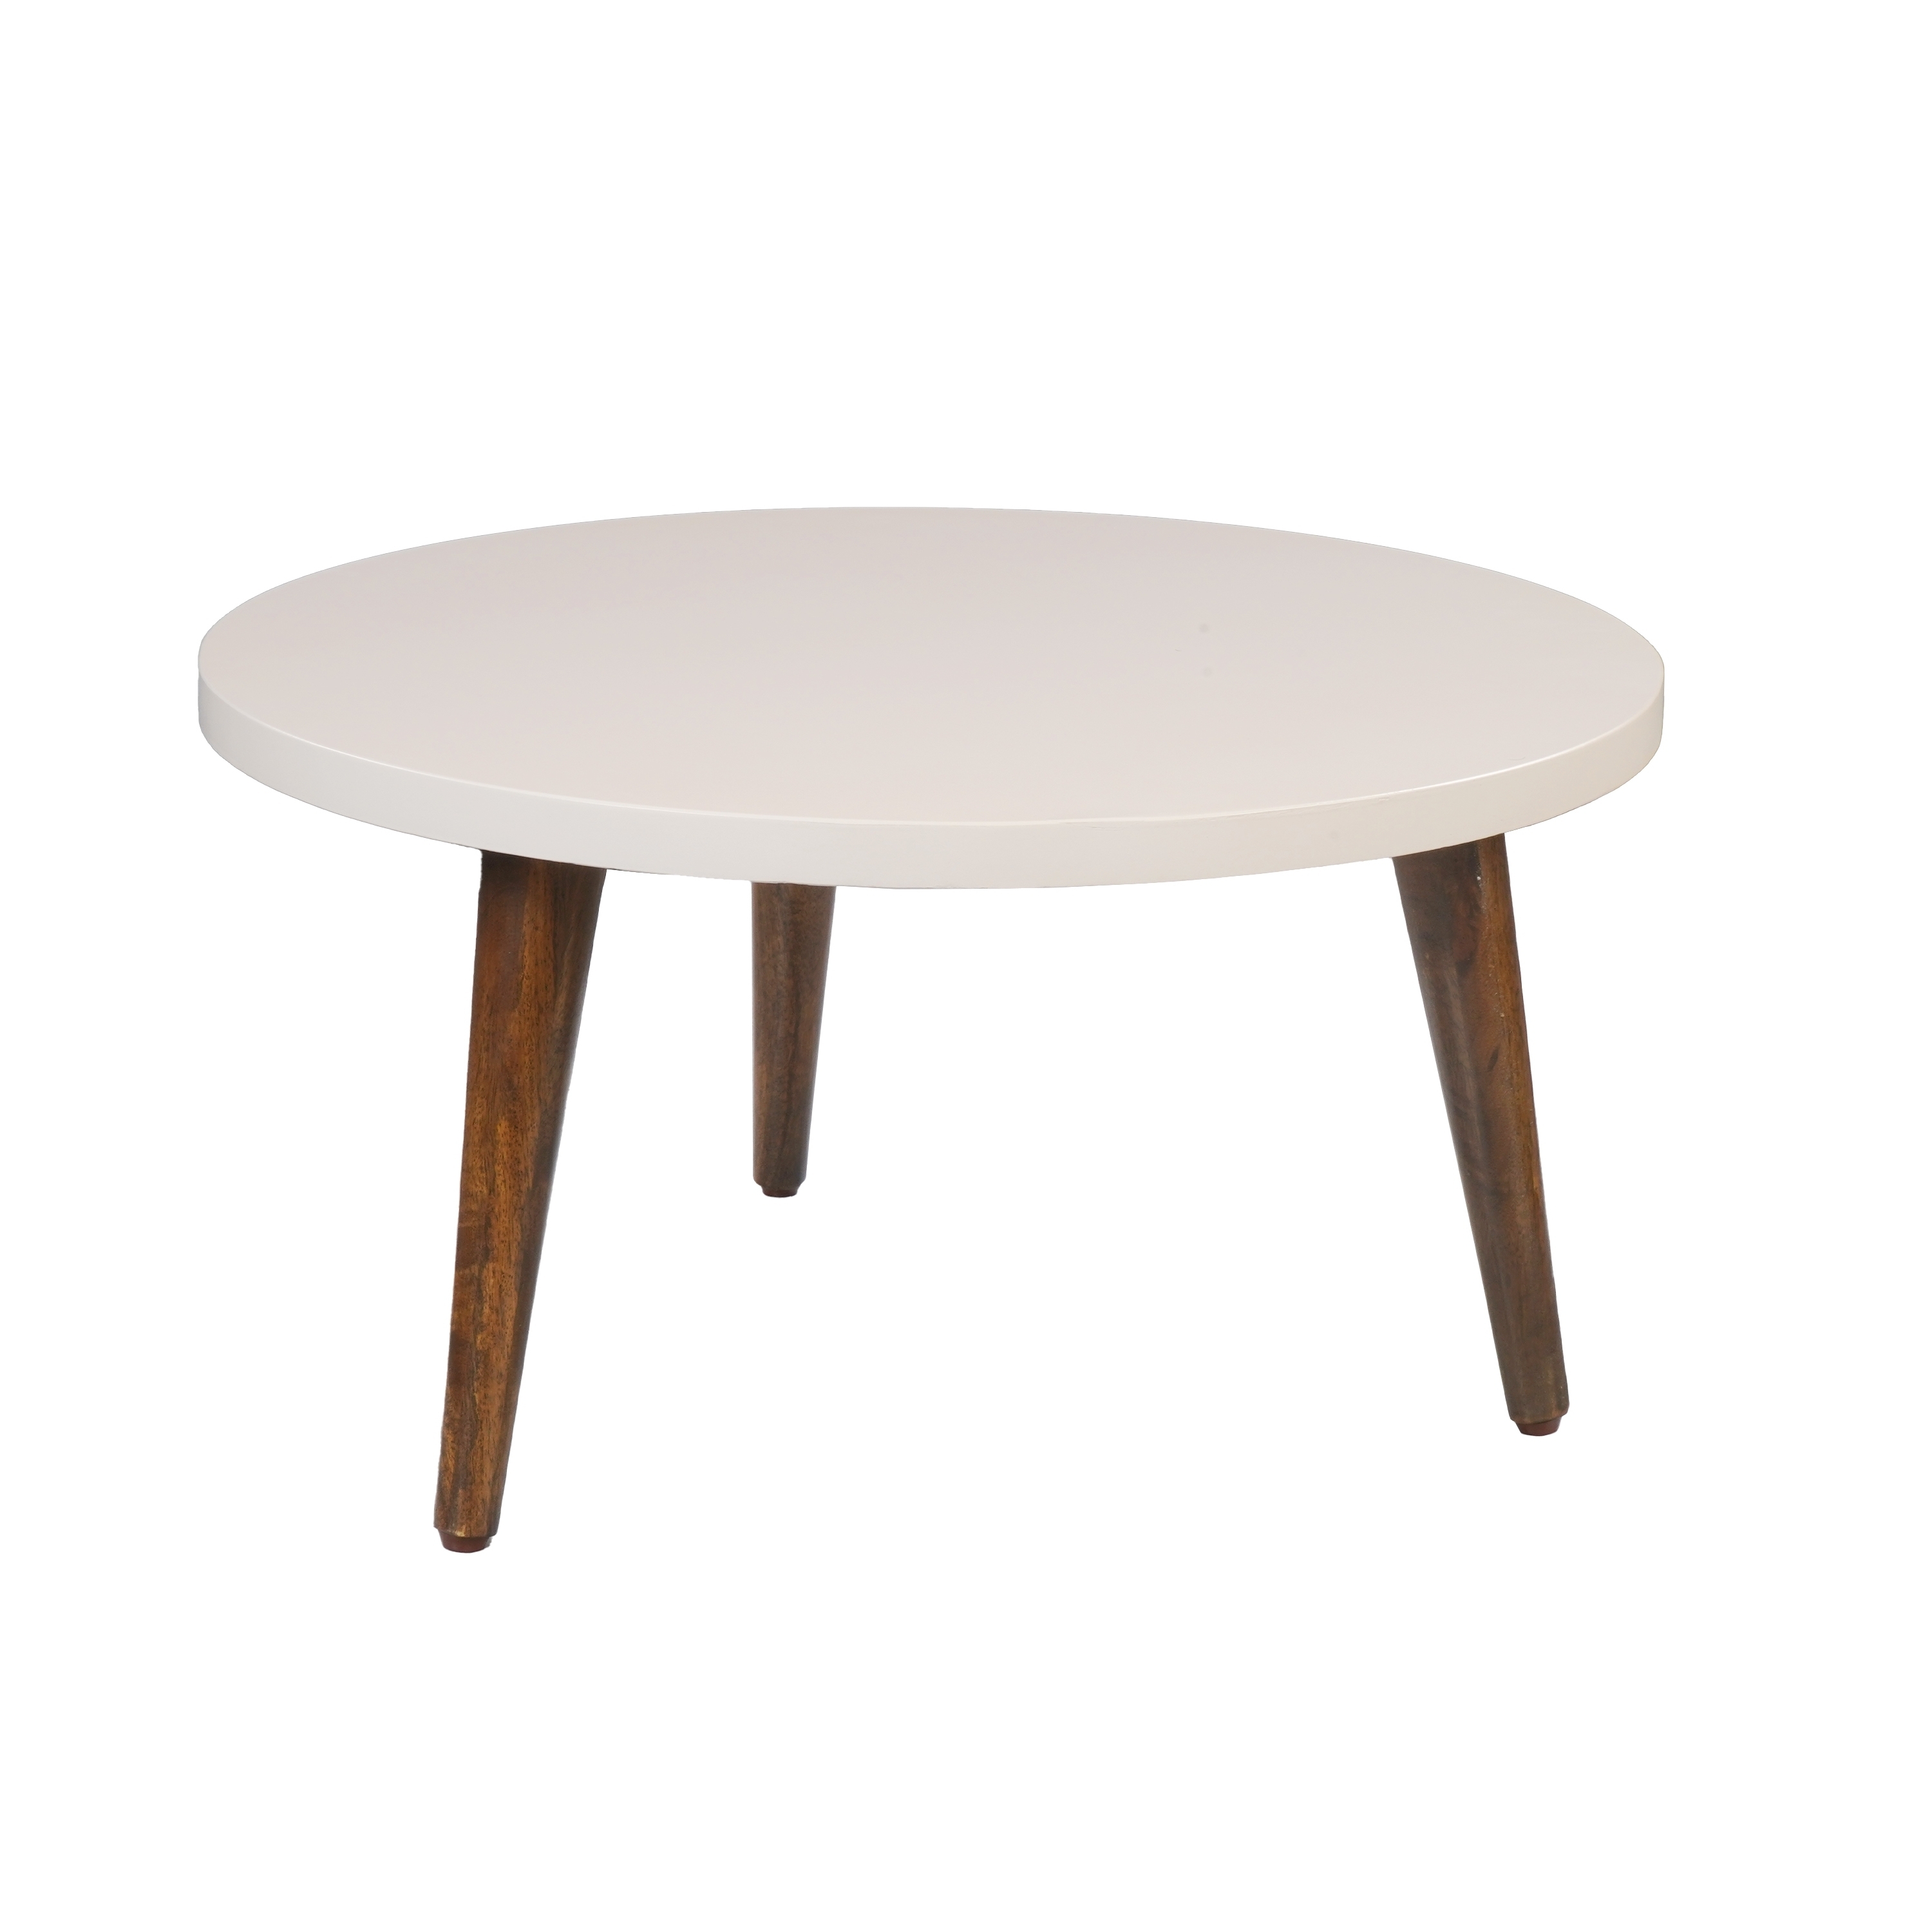 24 Inch Round Wooden Coffee Table With Splayed Legs, White And Brown- Saltoro Sherpi